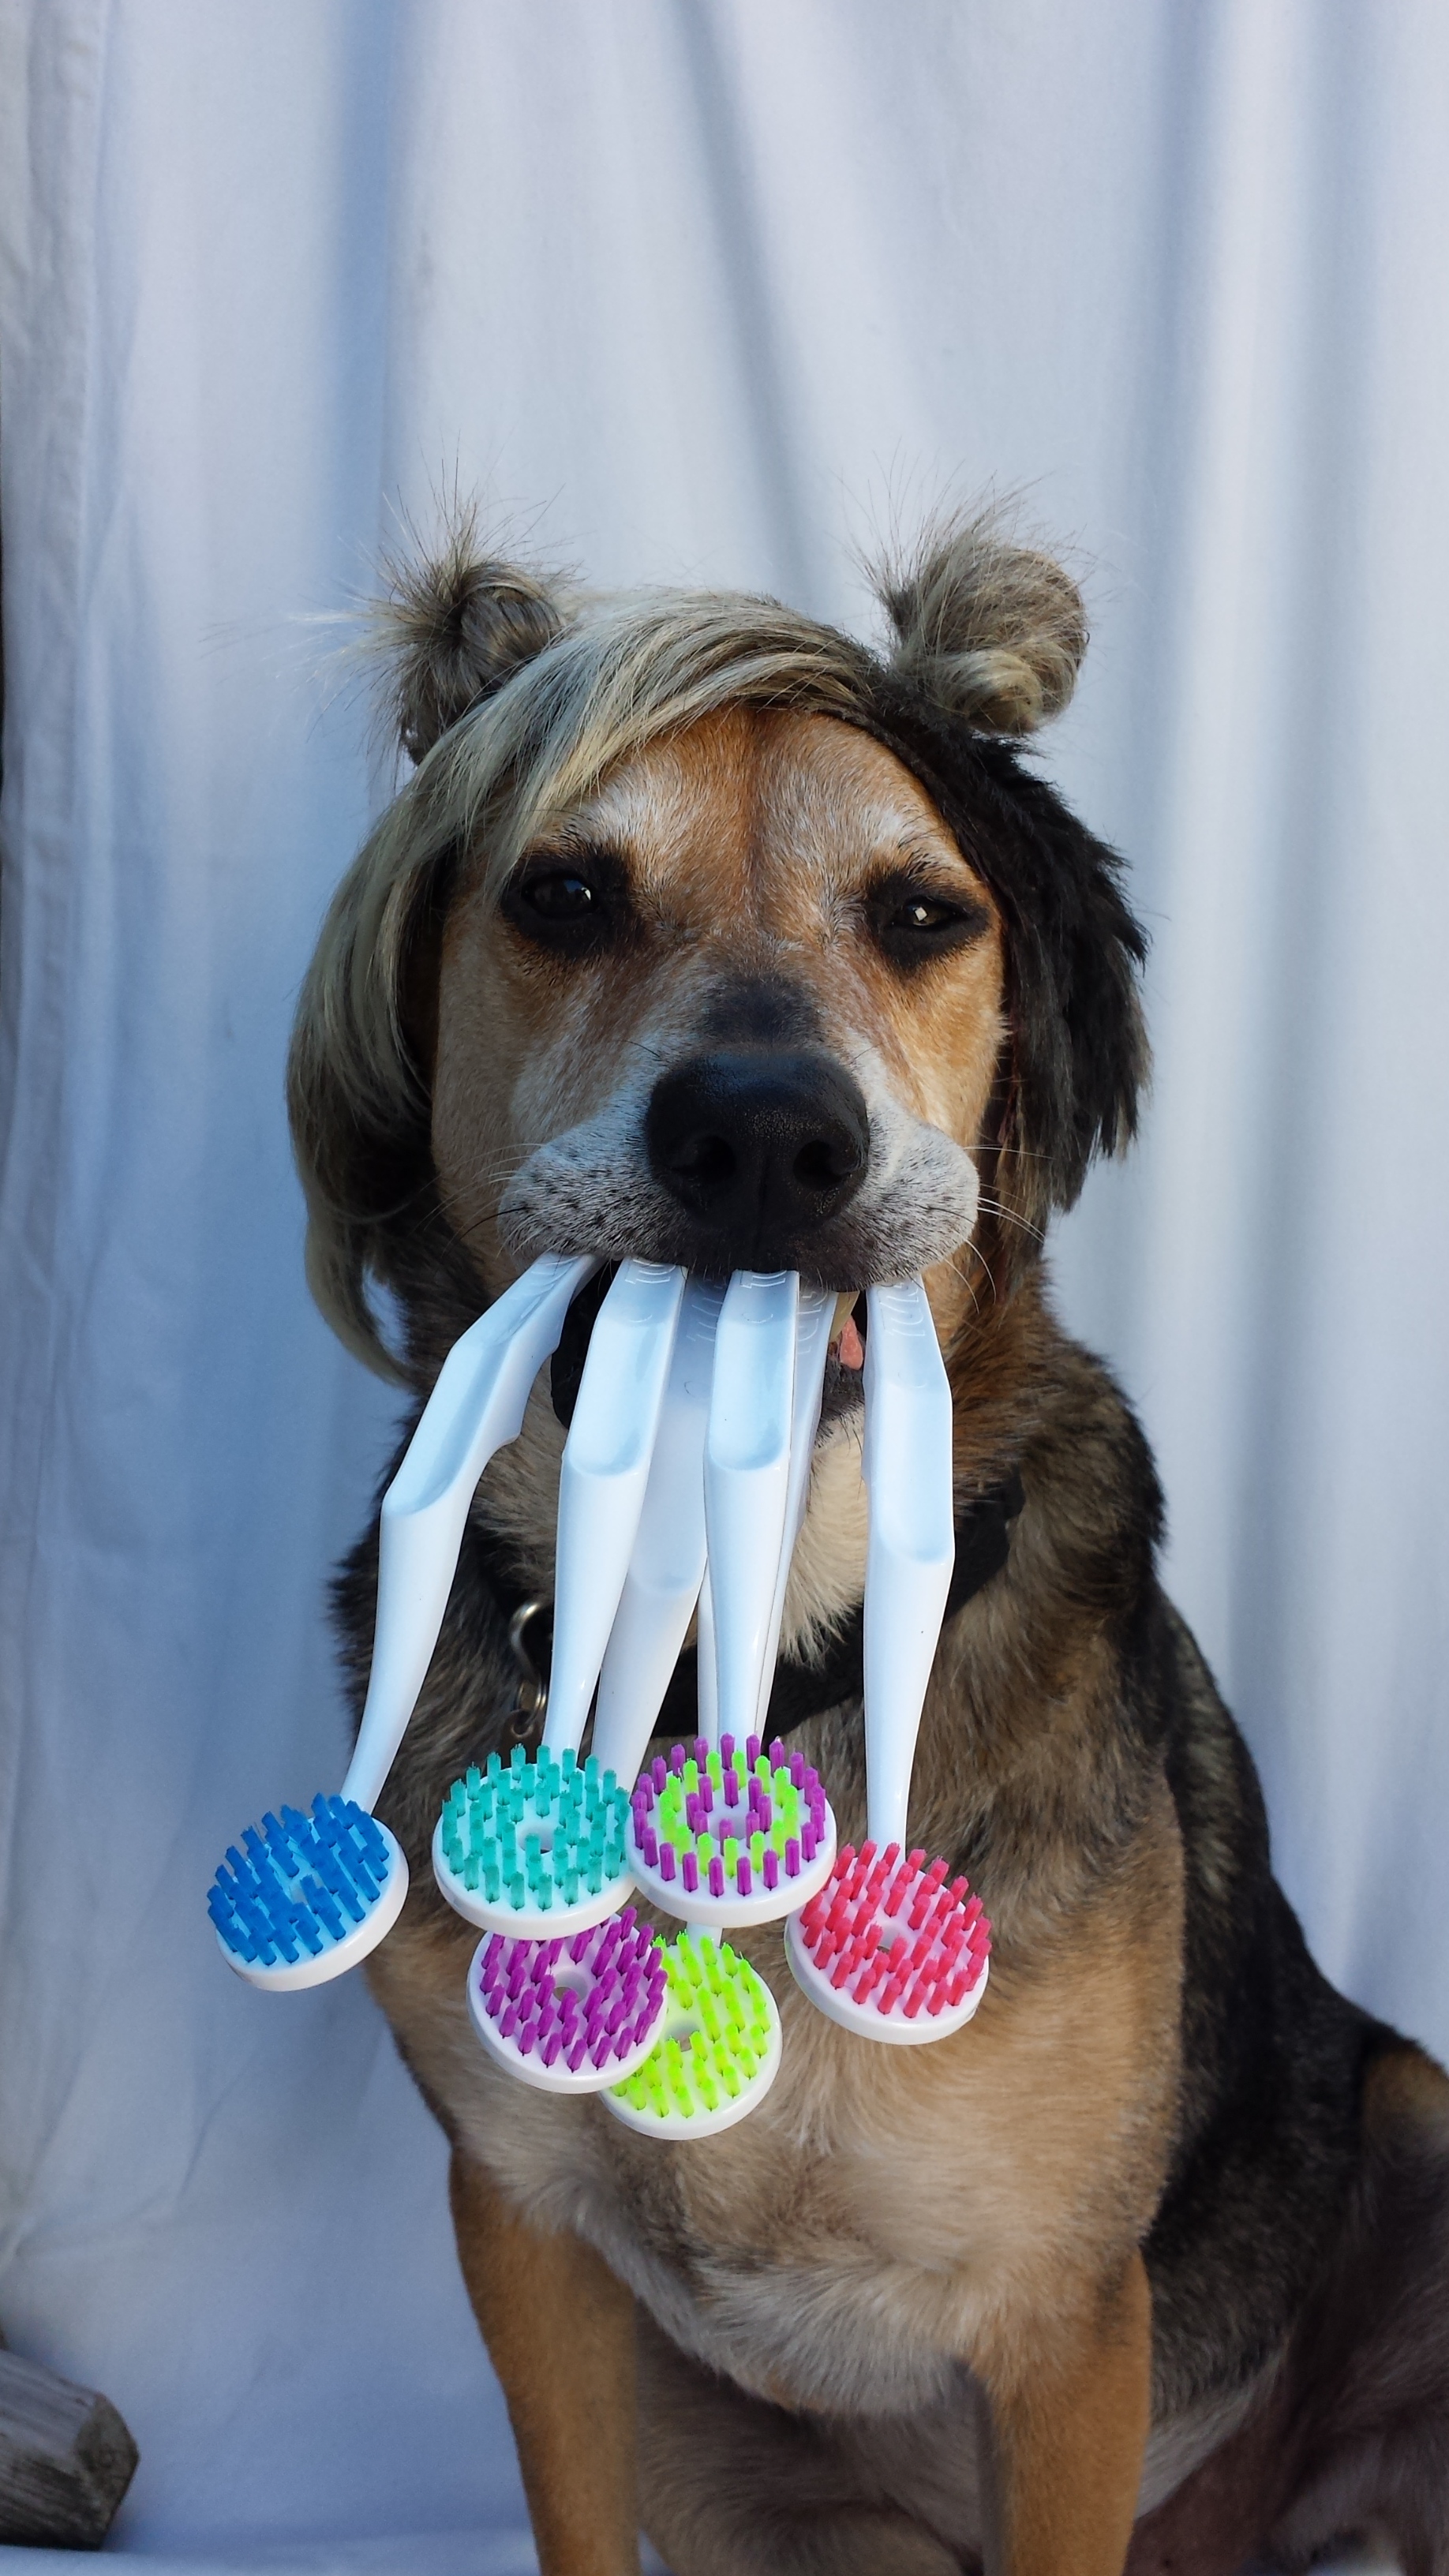 An Open Letter to Miley Cyrus from Bart the Dog